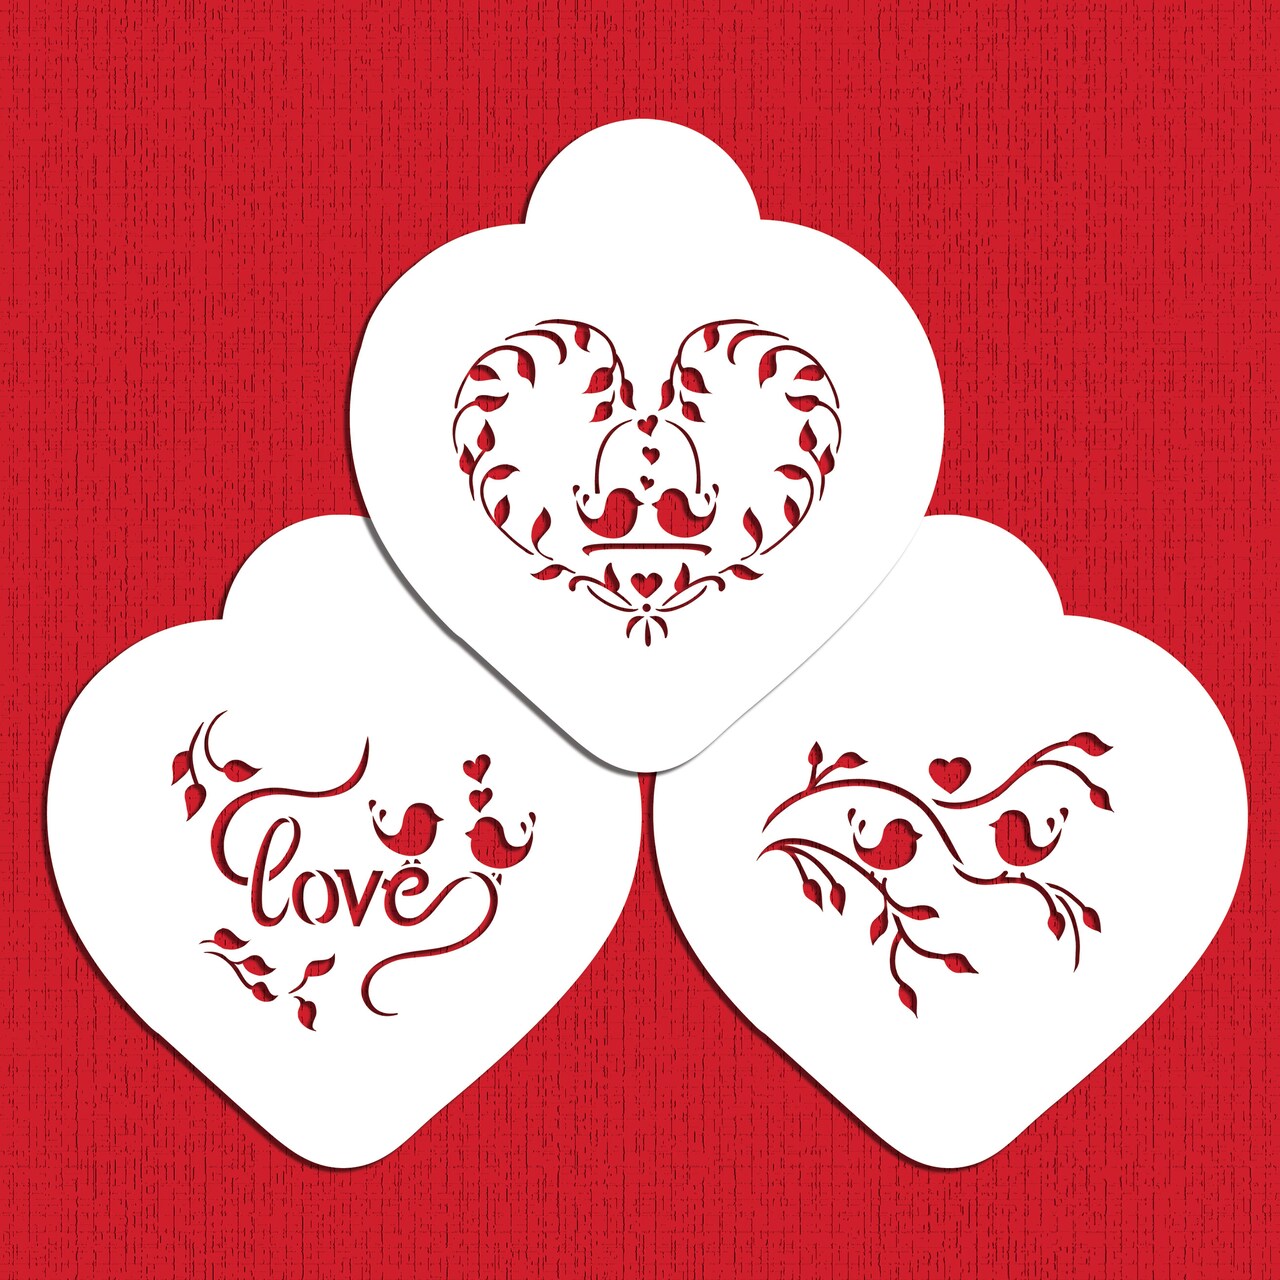 Love Birds Heart Cookie Stencil Set | C874 by Designer Stencils | Cookie Decorating Tools | Baking Stencils for Royal Icing, Airbrush, Dusting Powder | Reusable Plastic Food Grade Stencil for Cookies | Easy to Use &#x26; Clean Cookie Stencil